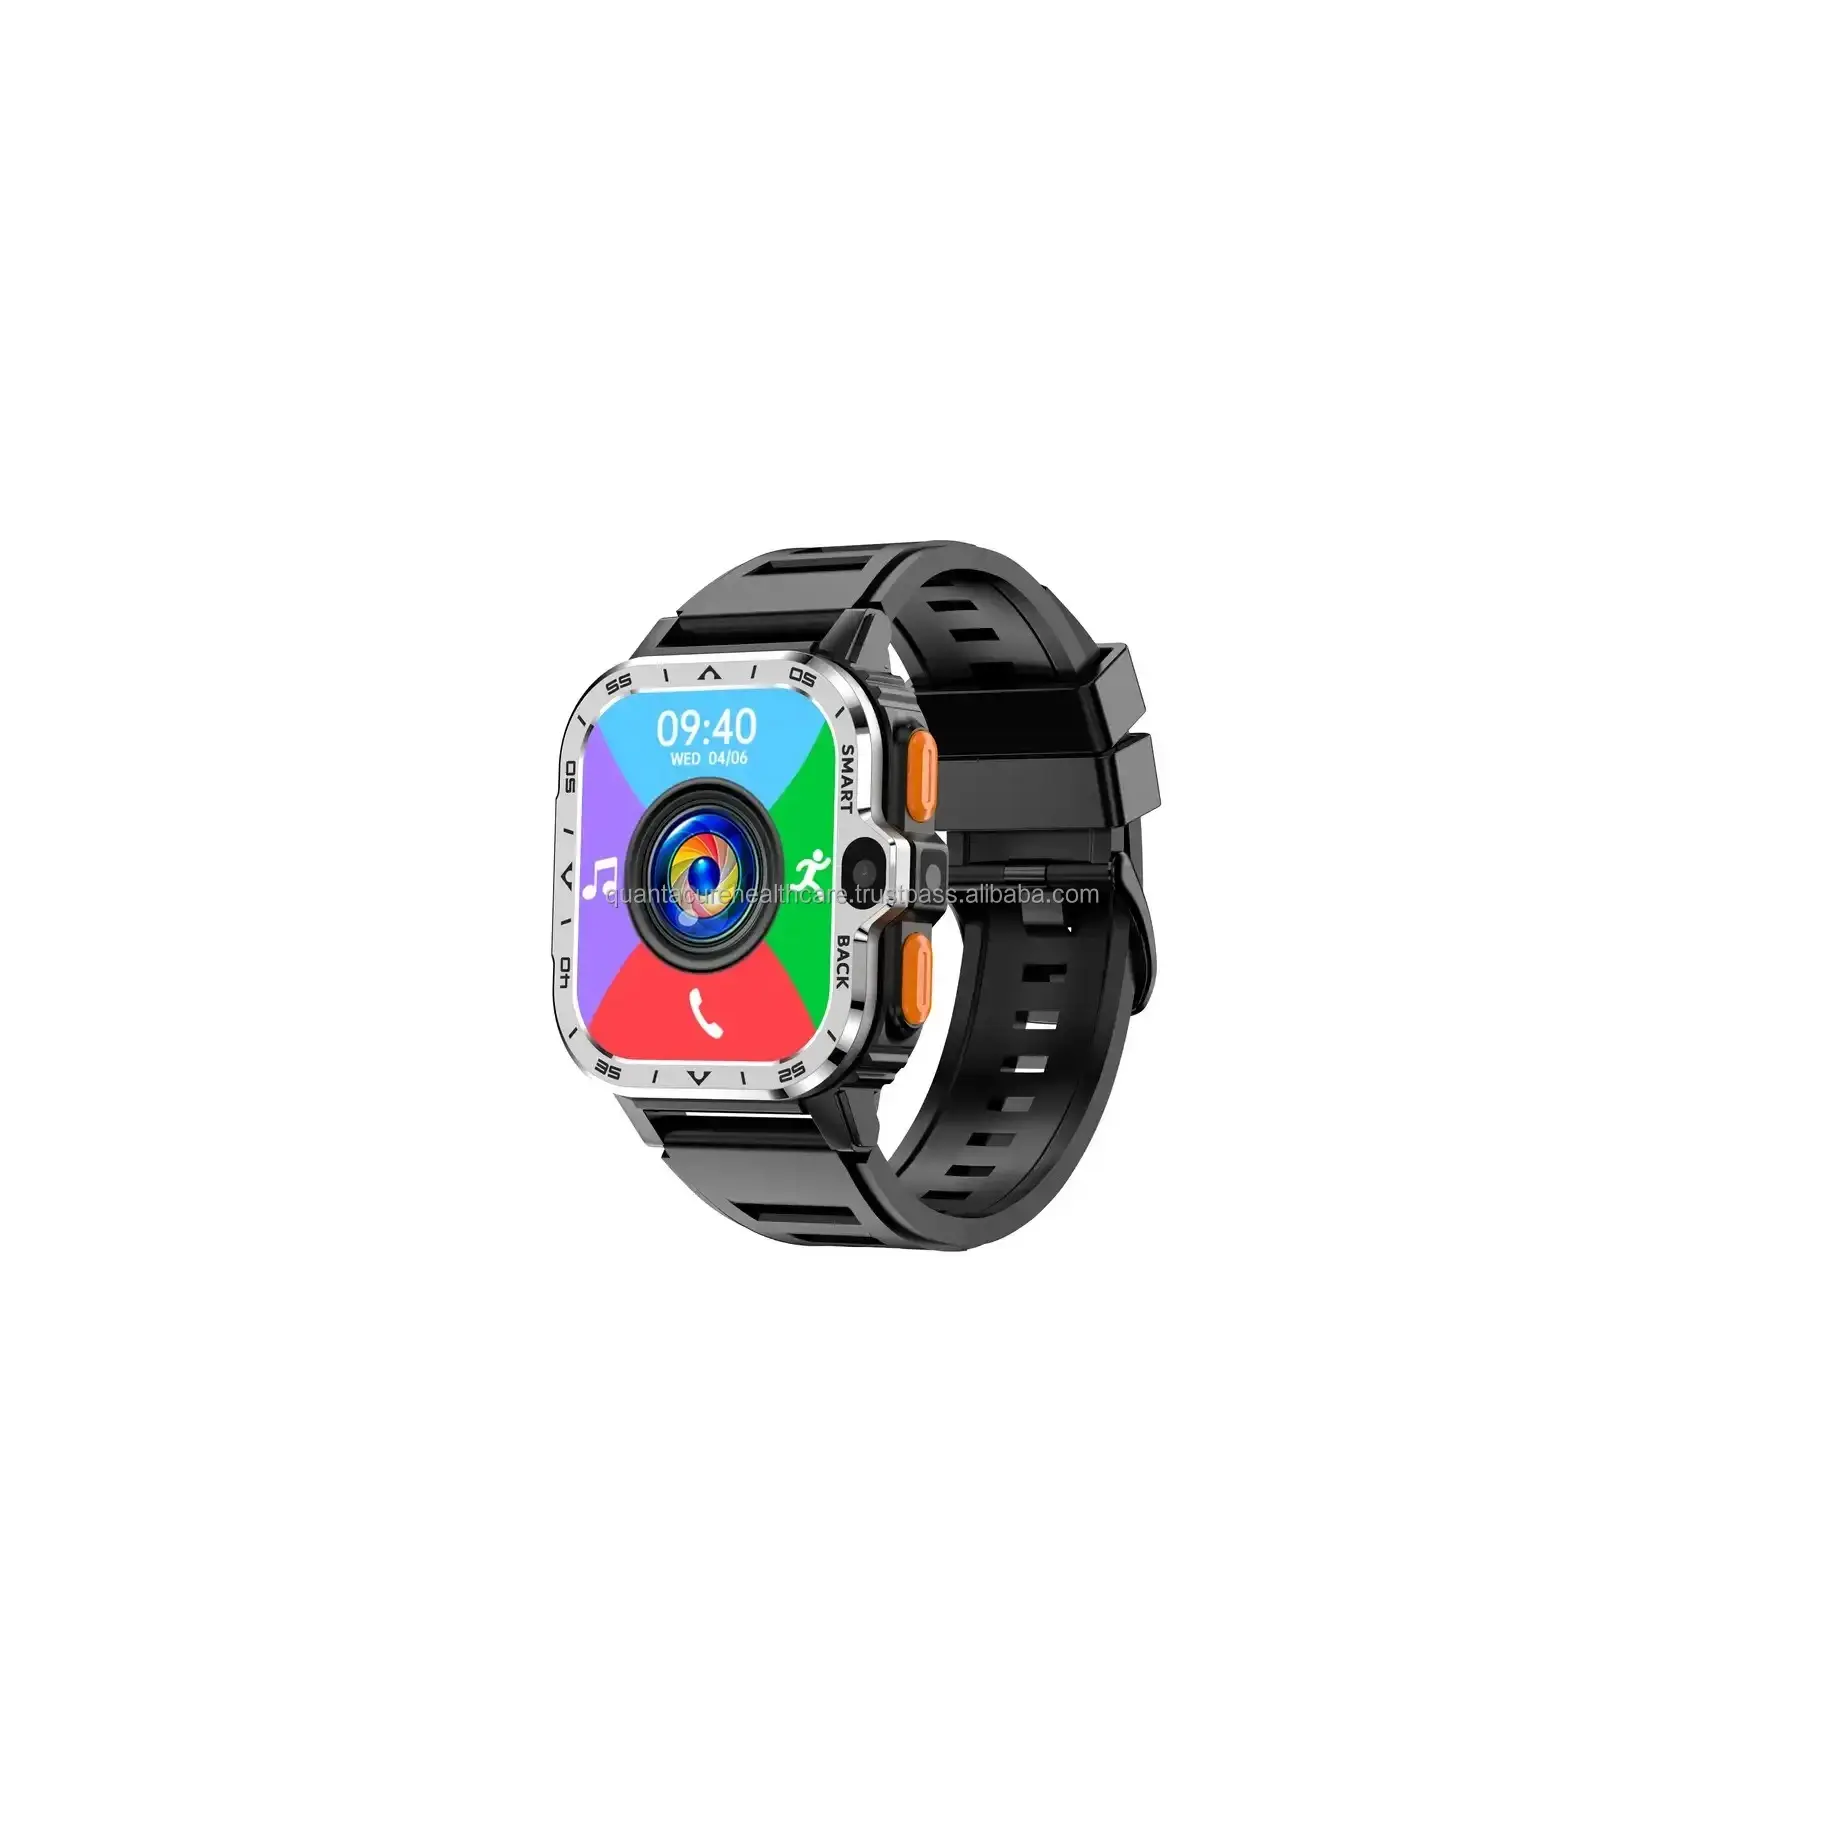 Unisex Smartwatches QC A9 S8 Ultra S9 with Dual Video Camera Fashion PGD Smart Watch Sim Card Android GPS WIFI 4G Connectivity